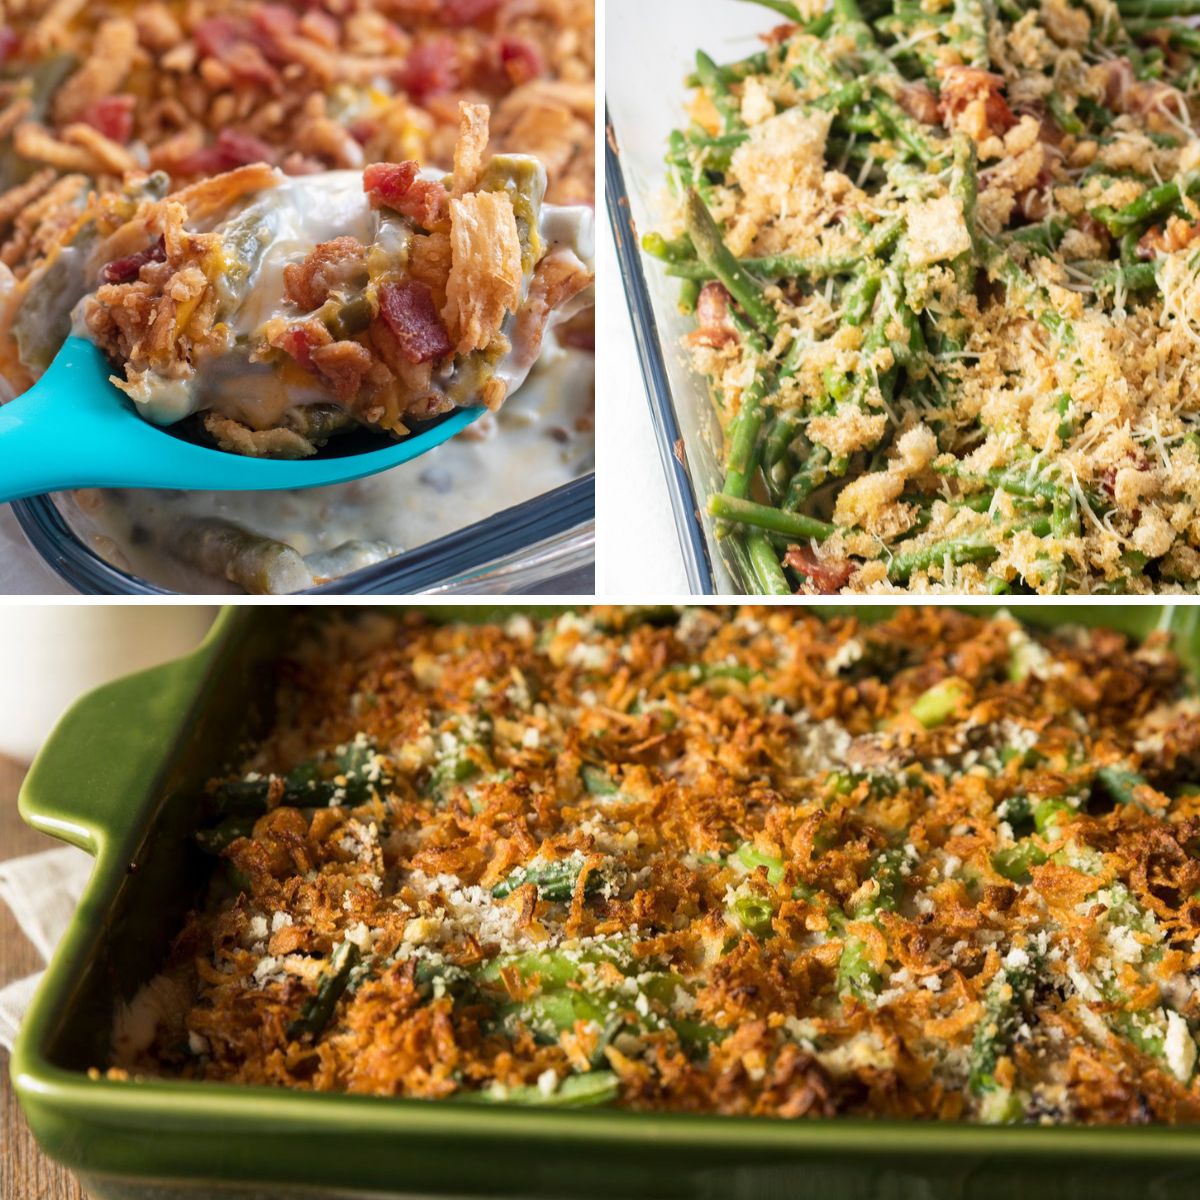 How to make green bean casserole using fresh, frozen, or canned green beans.